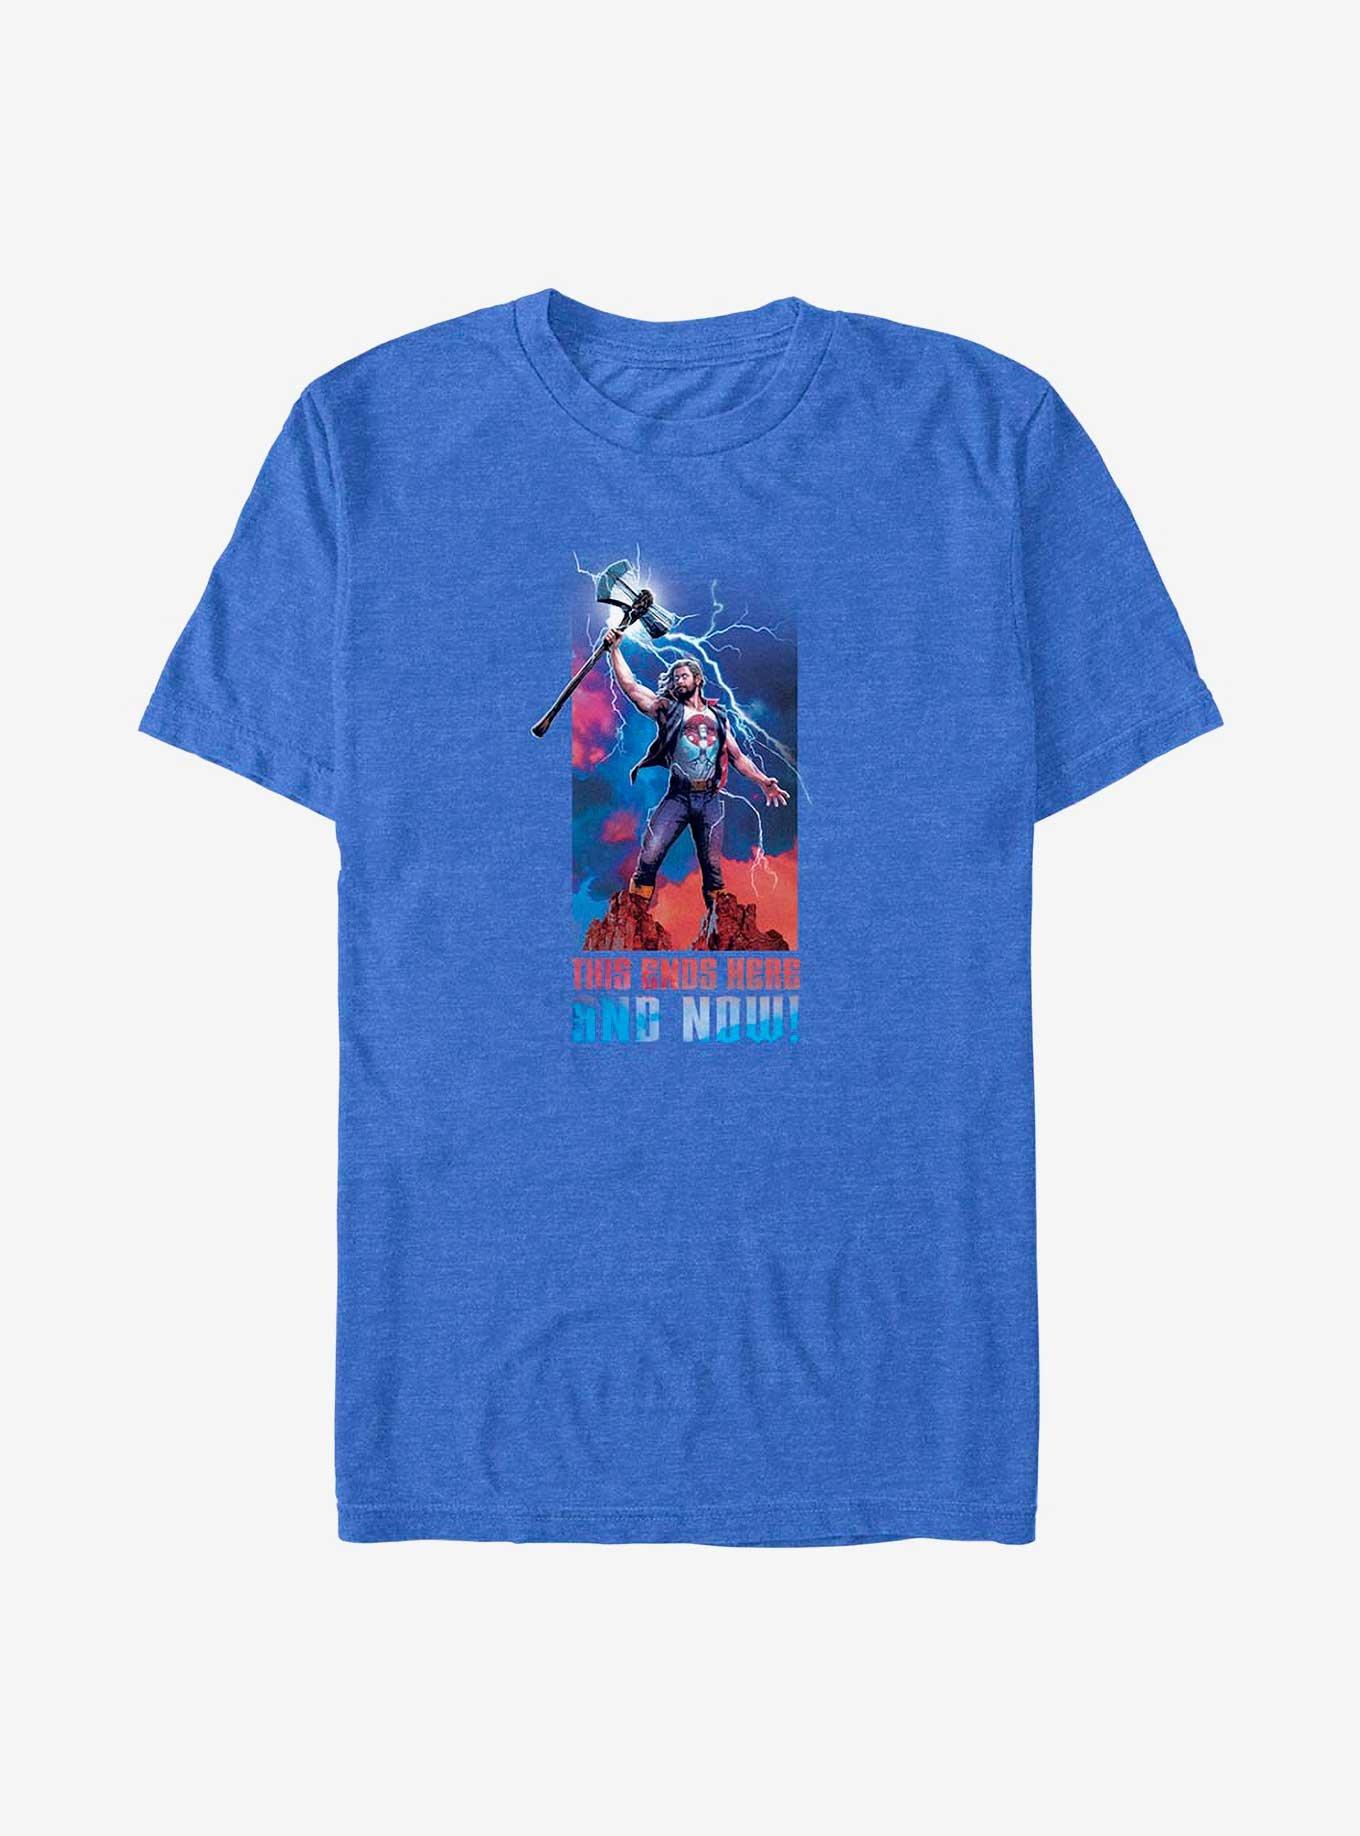 Marvel Thor: Love and Thunder Ends Here and Now T-Shirt, ROY HTR, hi-res